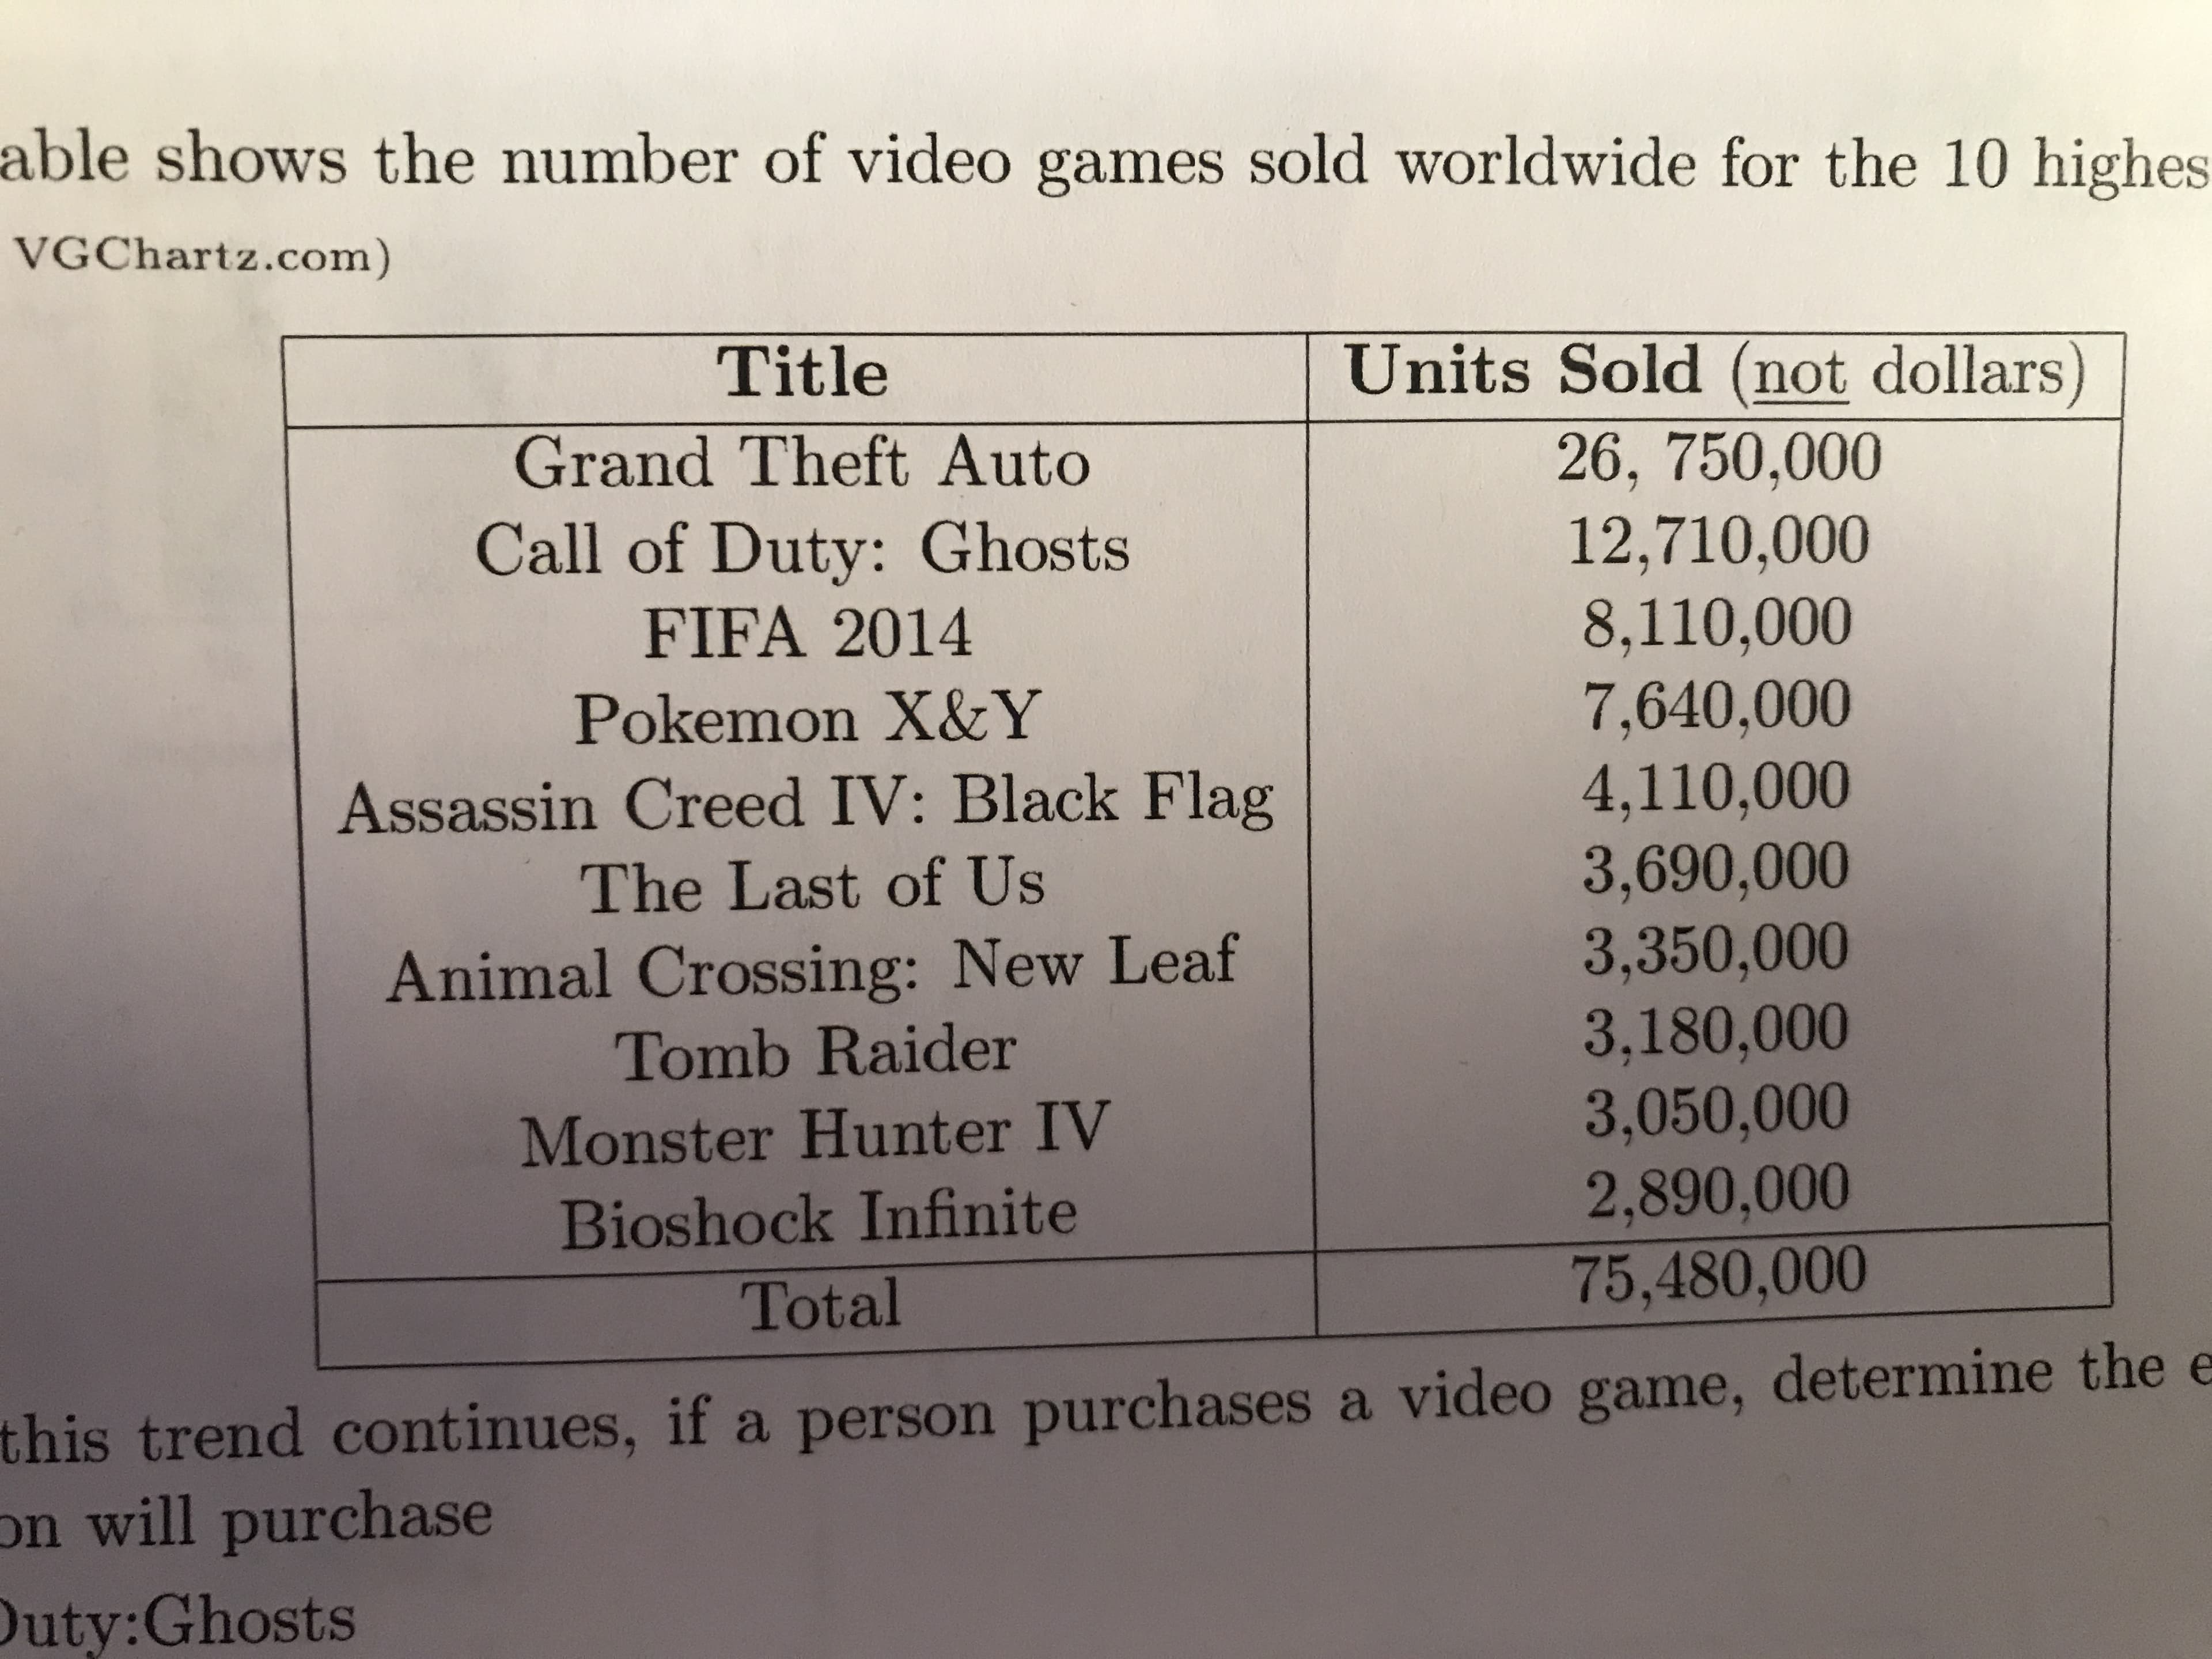 able shows the number of video games sold worldwide for the 10 highes
VGChartz.com)
Title
Units Sold (not dollars)
Grand Theft Auto
26, 750,000
12,710,000
8,110,000
7,640,000
4,110,000
3,690,000
3,350,000
3,180,000
3,050,000
2,890,000
75,480,000
Call of Duty: Ghosts
FIFA 2014
Pokemon X&Y
Assassin Creed IV: Black Flag
The Last of Us
Animal Crossing: New Leaf
Tomb Raider
Monster Hunter IV
Bioshock Infinite
Total
this trend continues, if a person purchases a video game, determine the
on will purchase
uty: Ghosts
